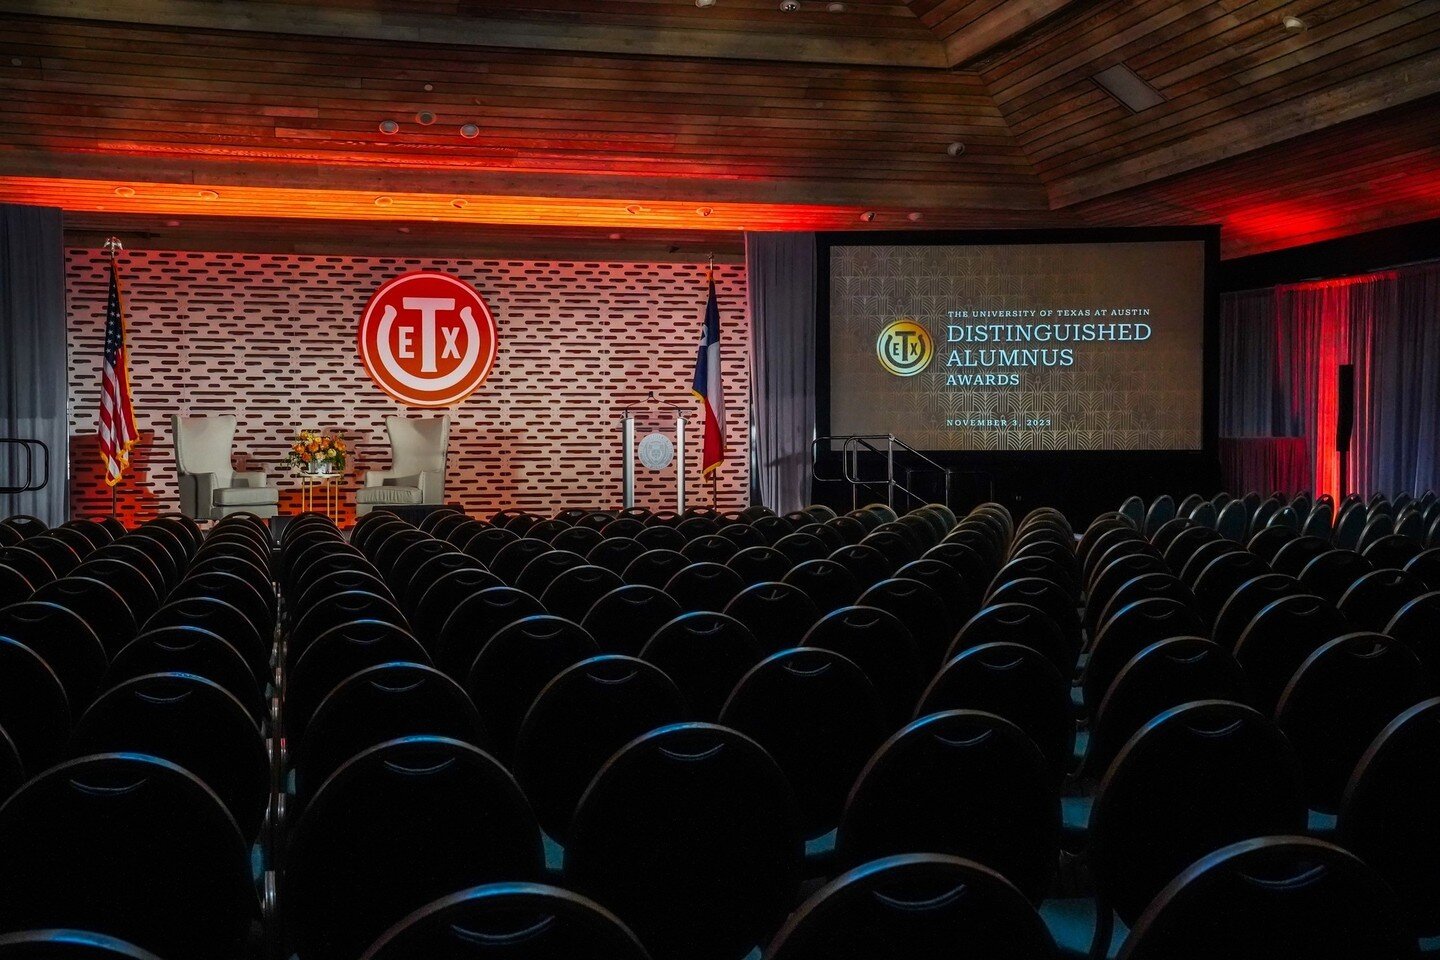 Crafting the perfect setup for your next Corporate Seminar, Meeting or Award Ceremony ✔️